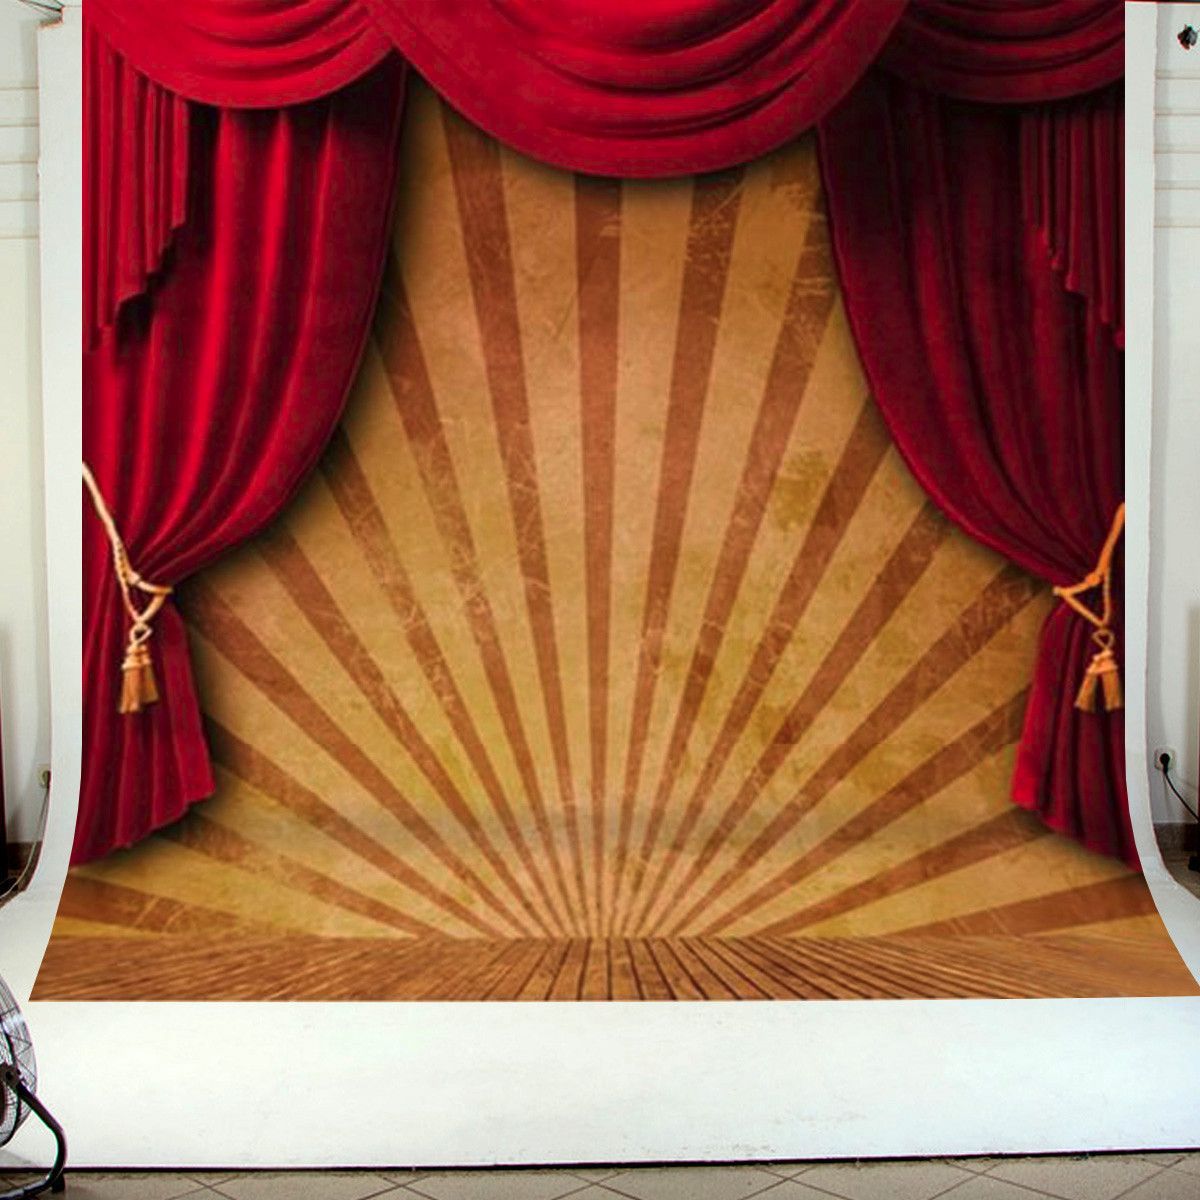 10x10FT-Circus-Red-Curtain-Stage-Photography-Backdrop-Studio-Prop-Background-1405462